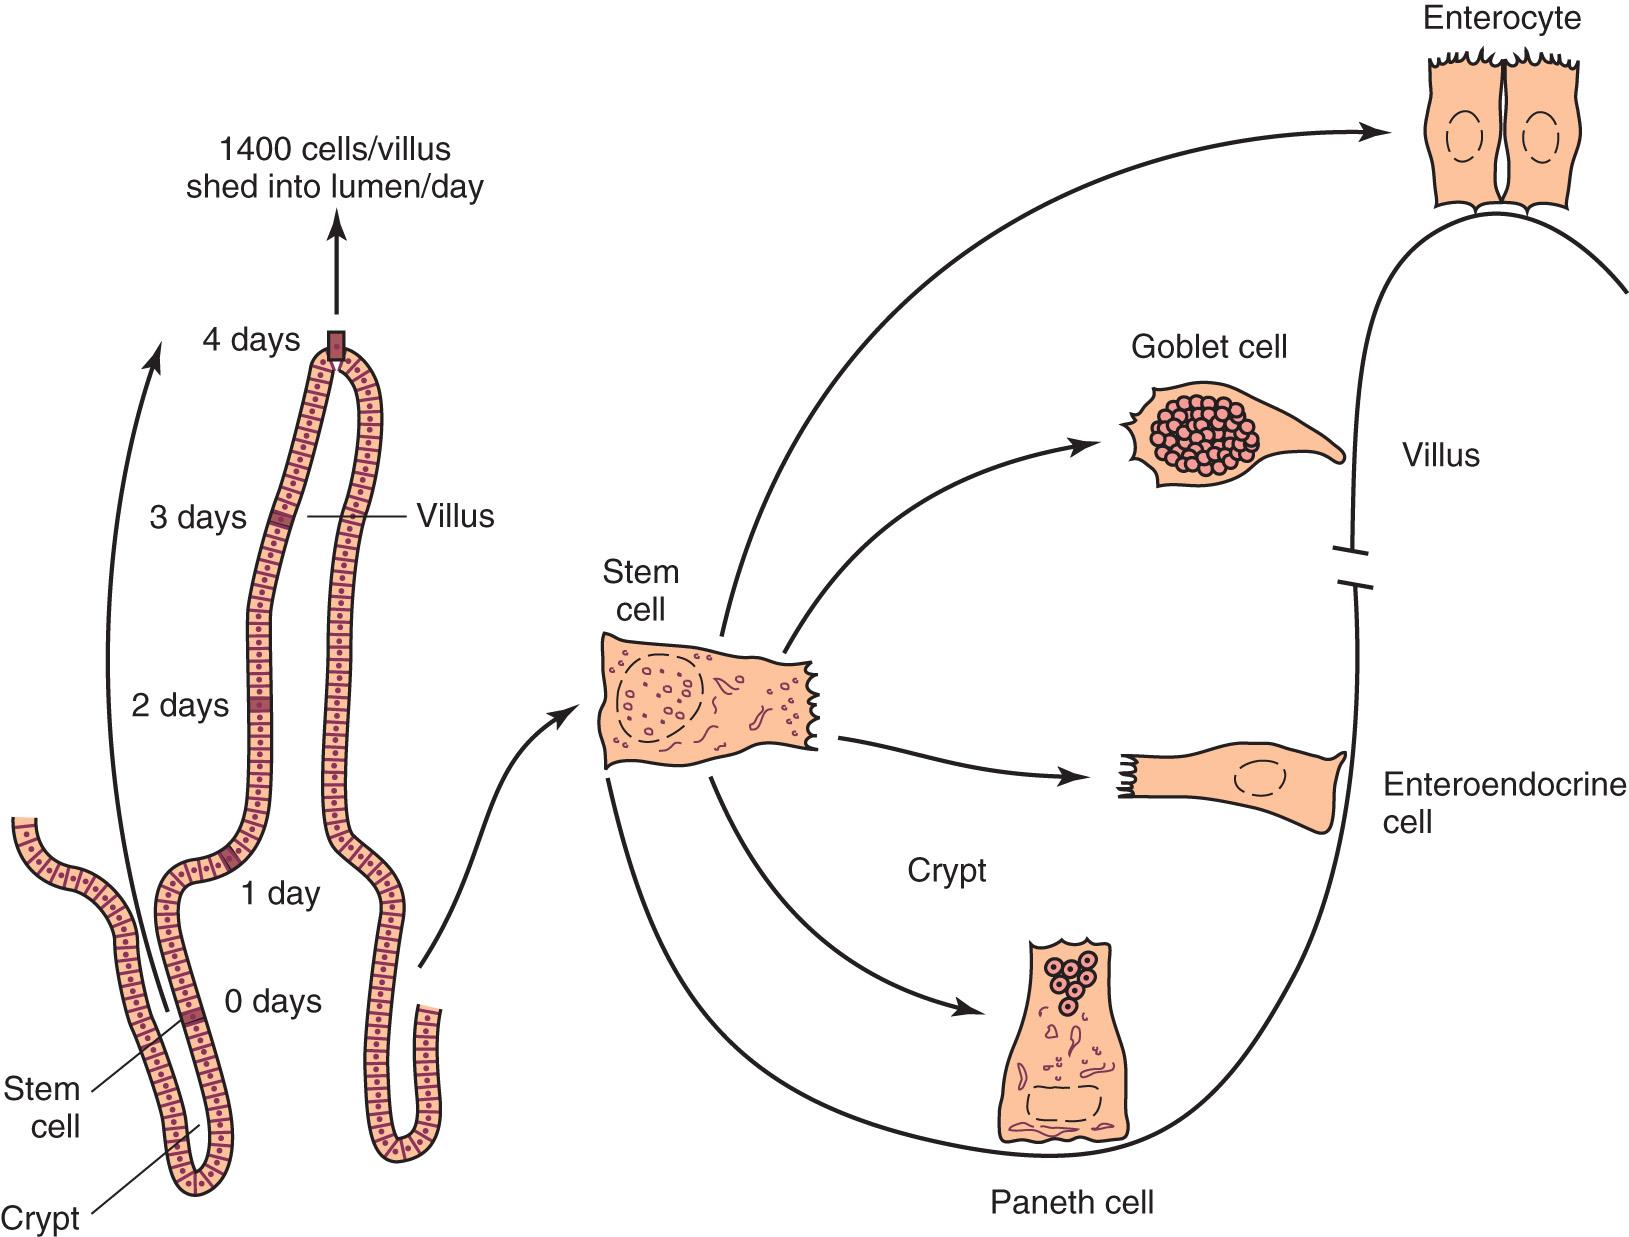 FIGURE 71.2, Stem cells differentiate in utero into one of four major epithelial cell types: Paneth, enteroendocrine, goblet, or enterocyte.